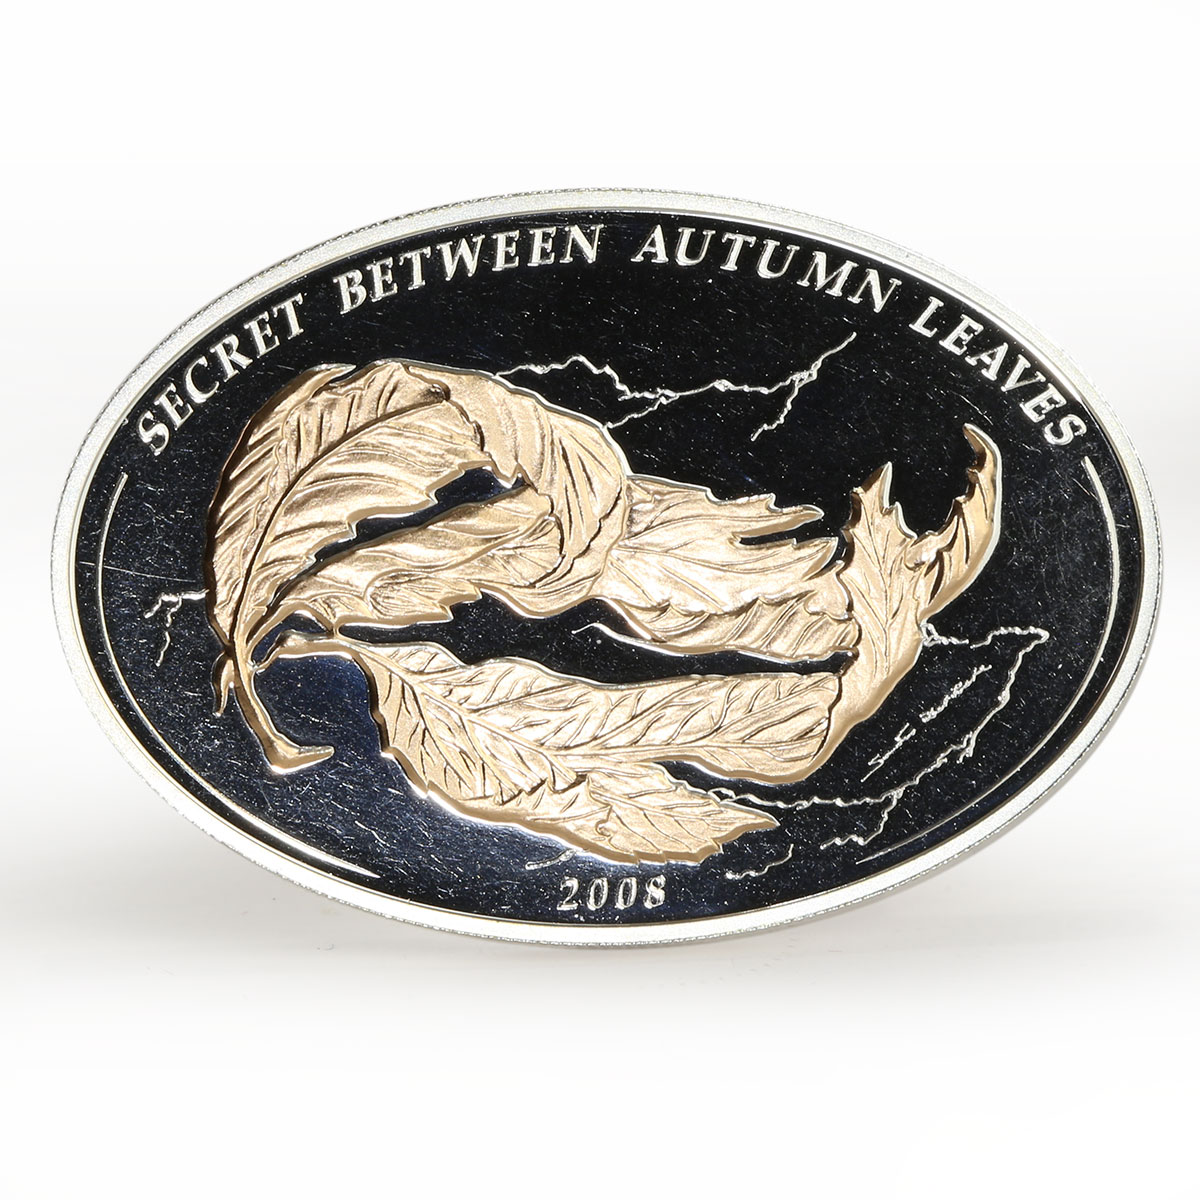 Palau $5 Secret between Autumn Leaves Oval Shaped Silver Coin 2008